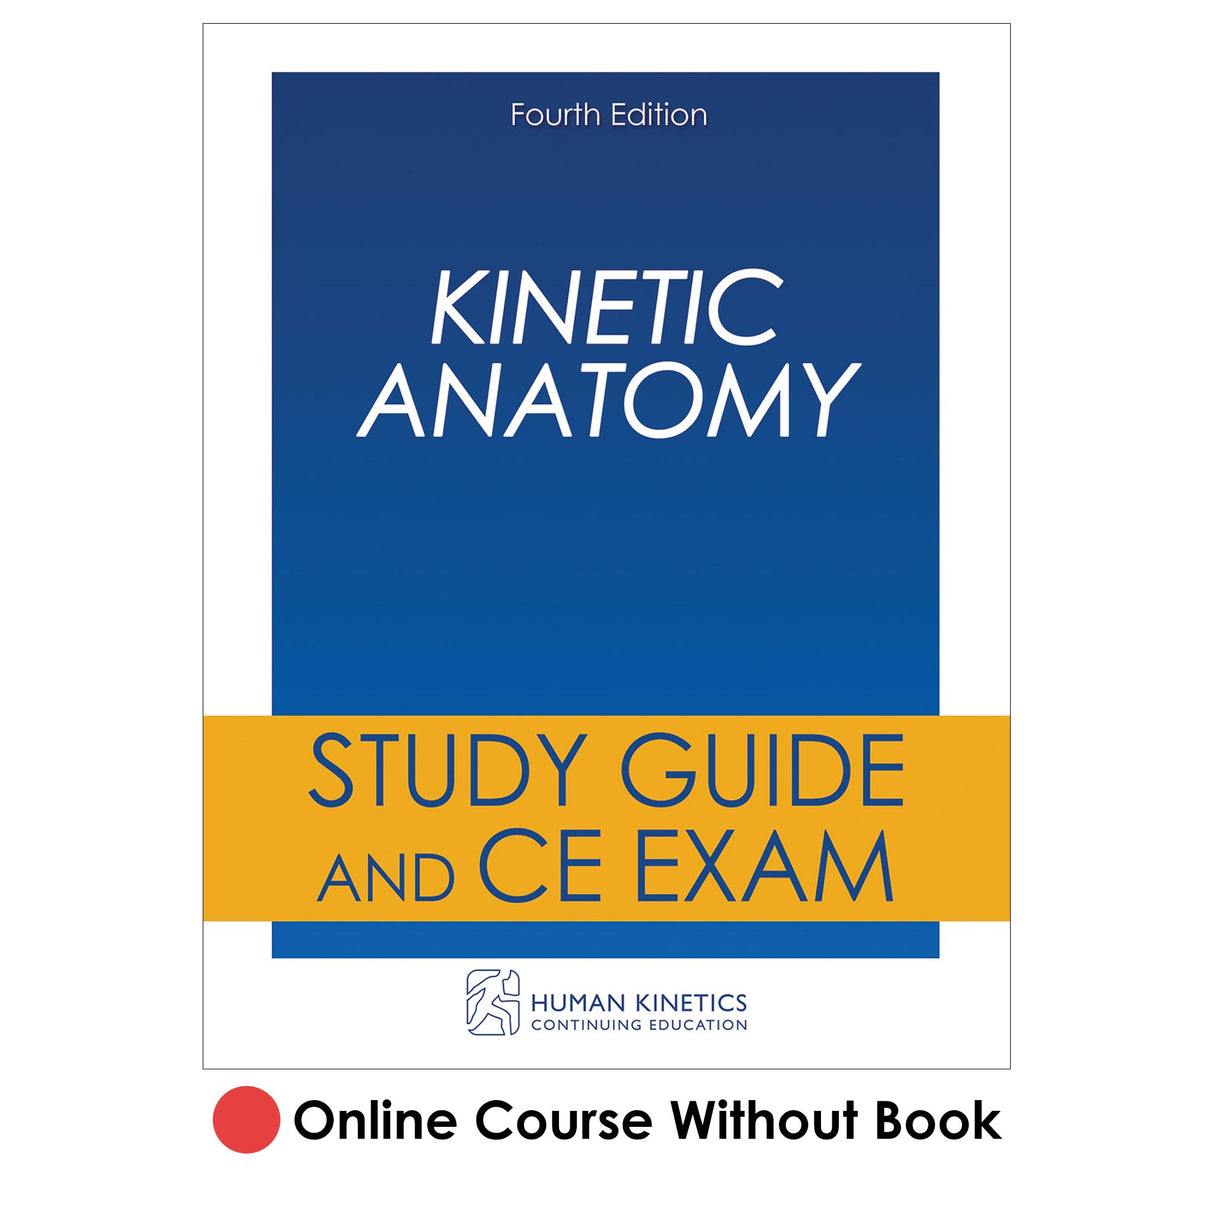 Kinetic Anatomy 4th Edition Online CE Course Without Book